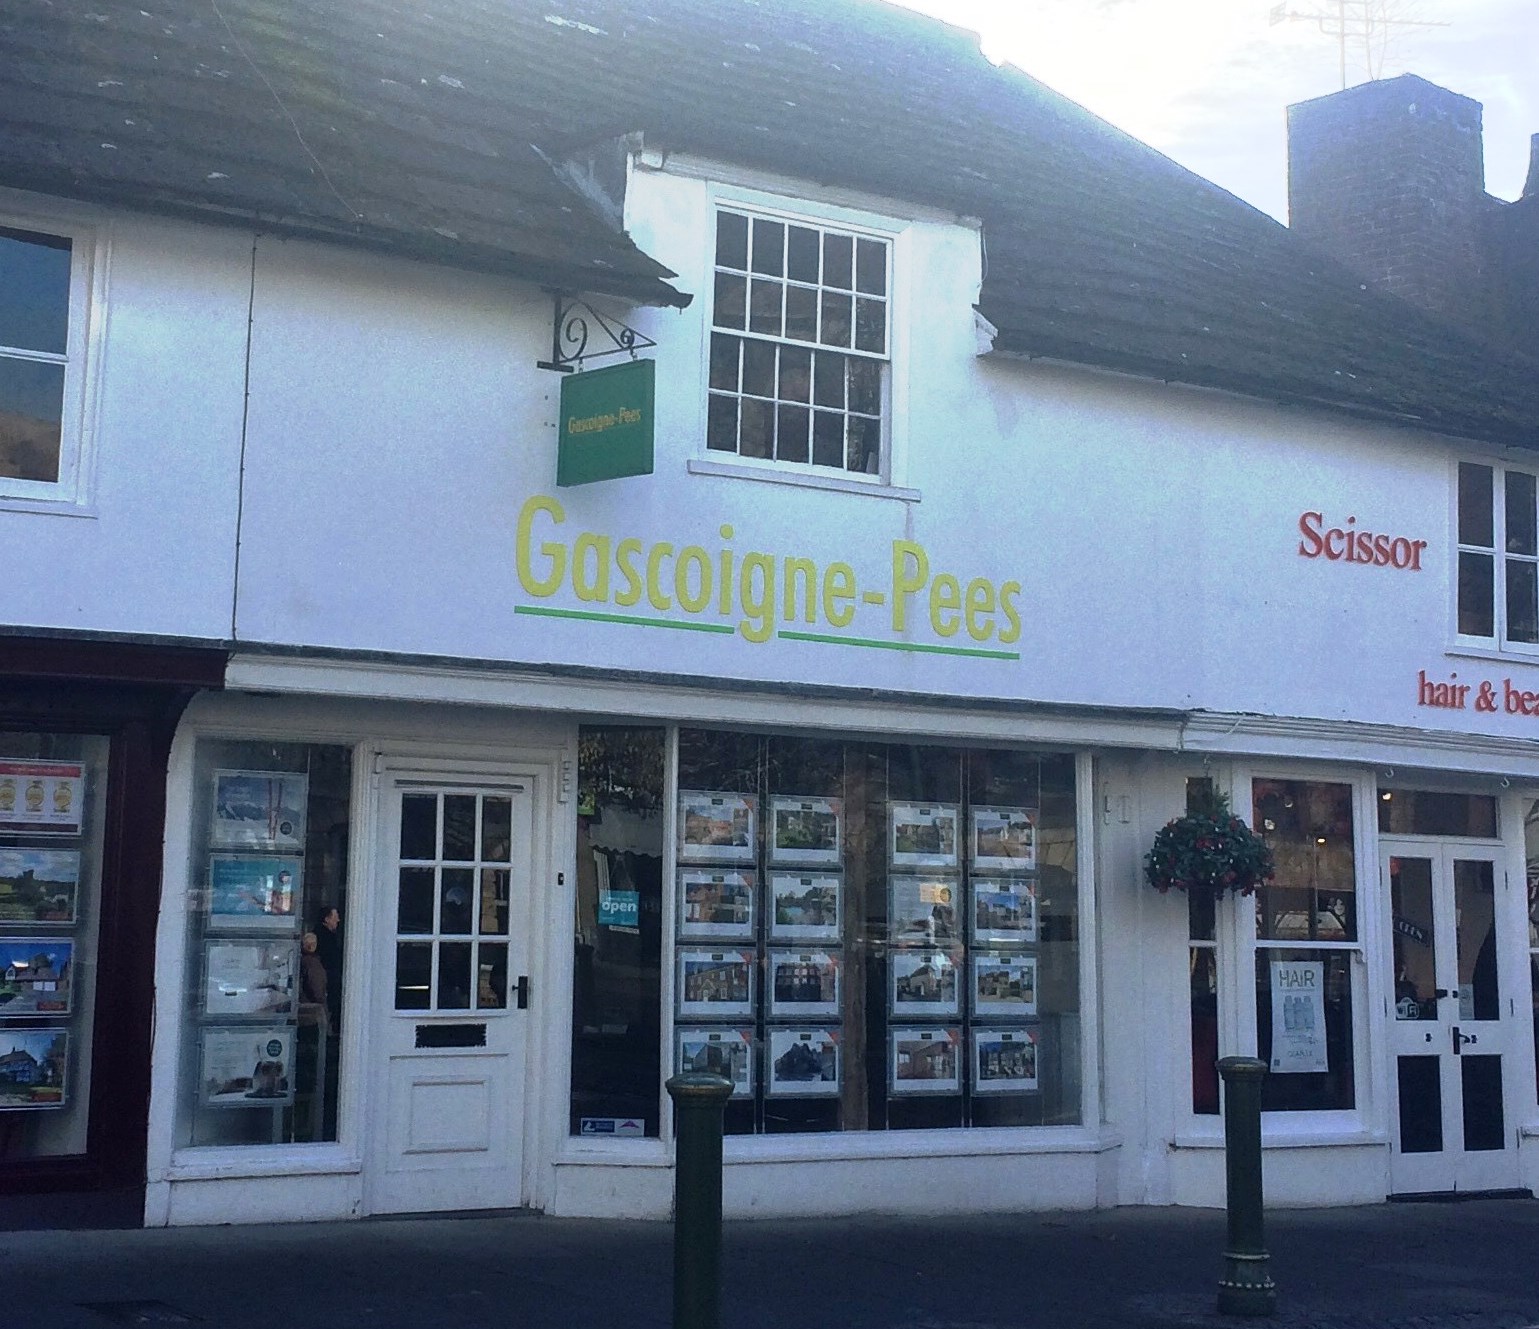 Images Gascoigne-Pees Sales and Letting Agents Horsham